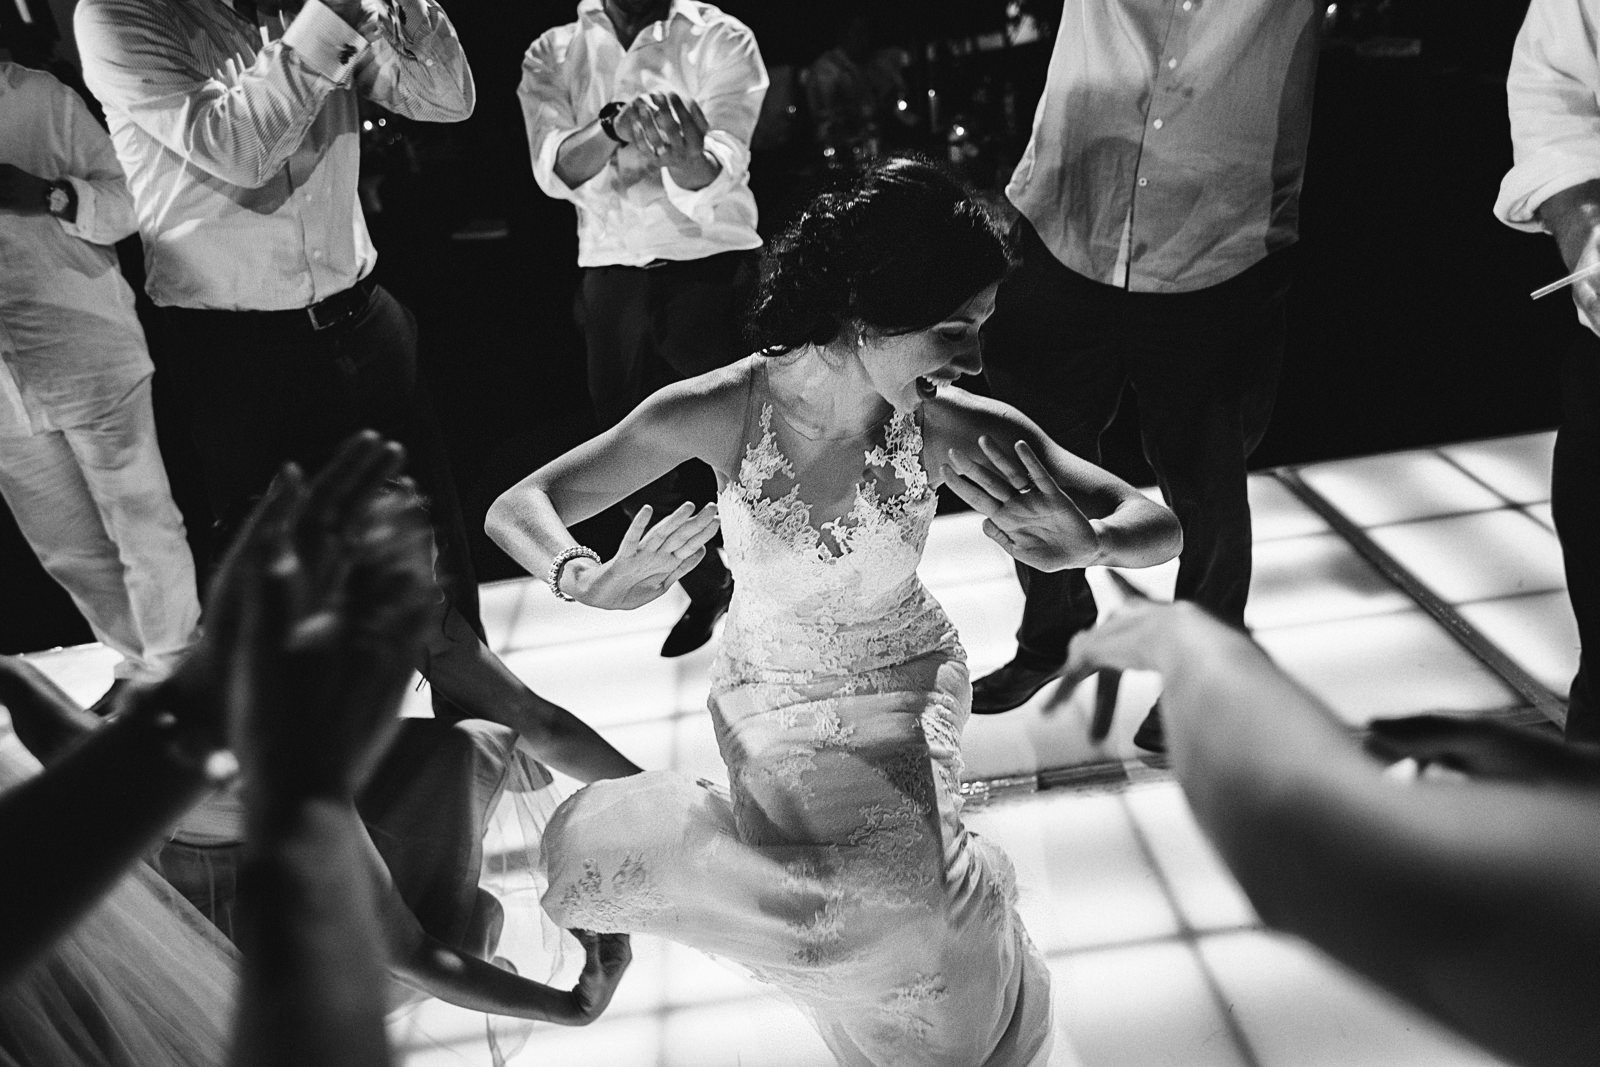 Bride showing off her best moves on the dance floor at her wedding reception party